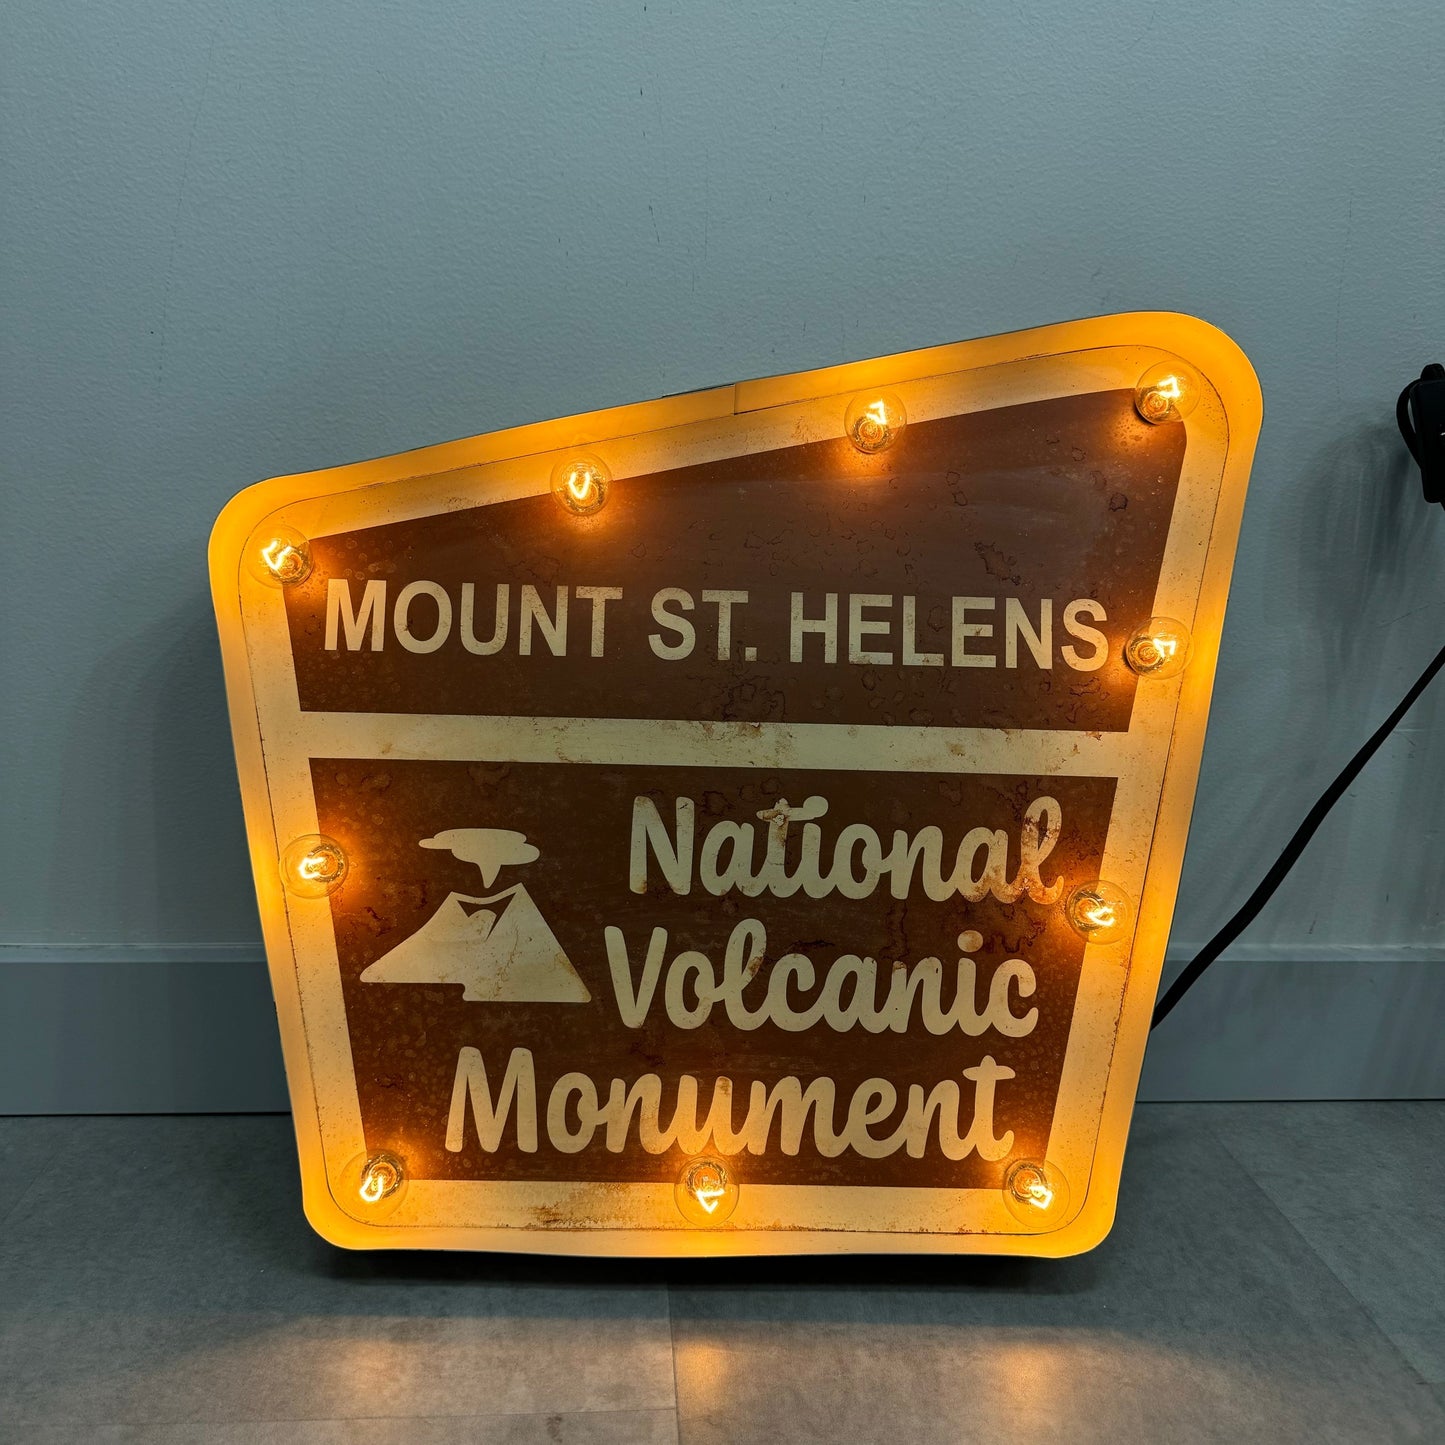 Mt St Helens National Volcanic Monument Lighted Sign - Rust Color